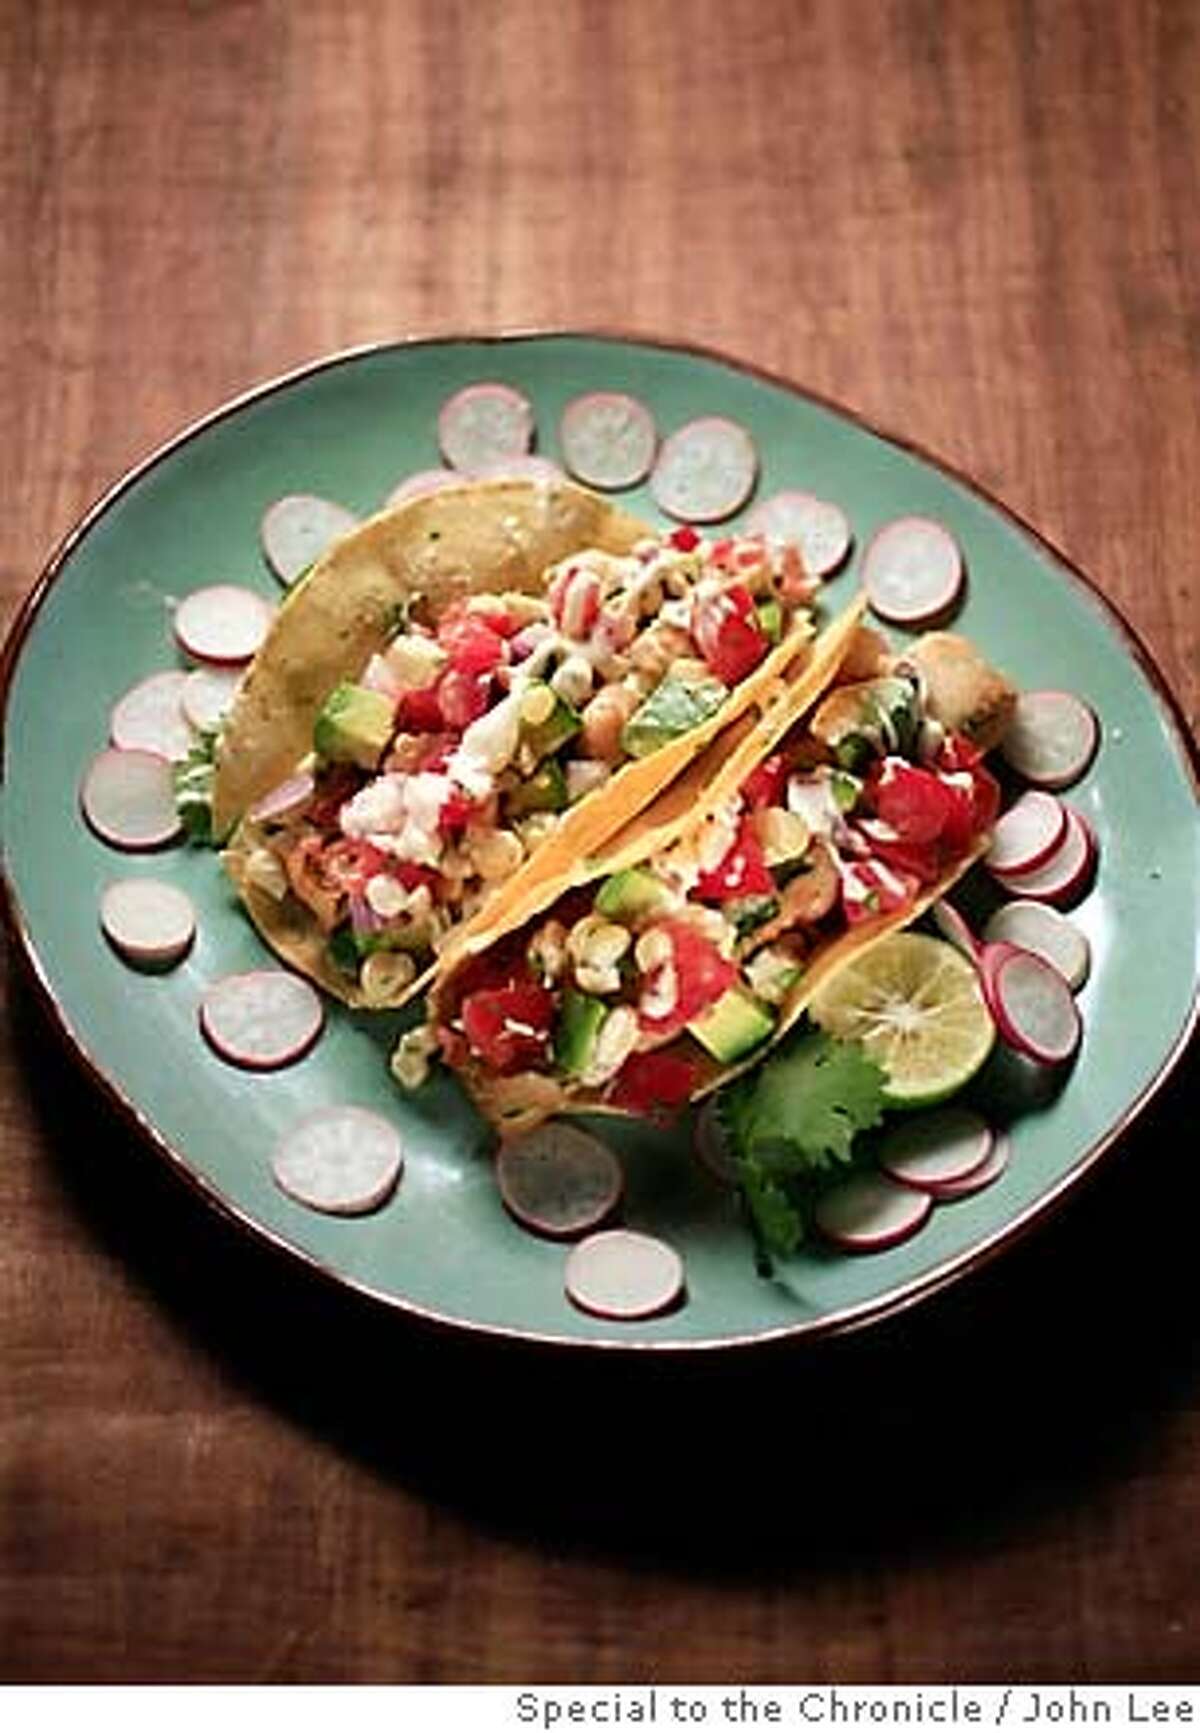 VEGETARIAN20_ZUCCHINI_TACO_02_JOHNLEE.JPG Zucchini Taco for Accidental Vegetarian. By JOHN LEE/SPECIAL TO THE CHRONICLE